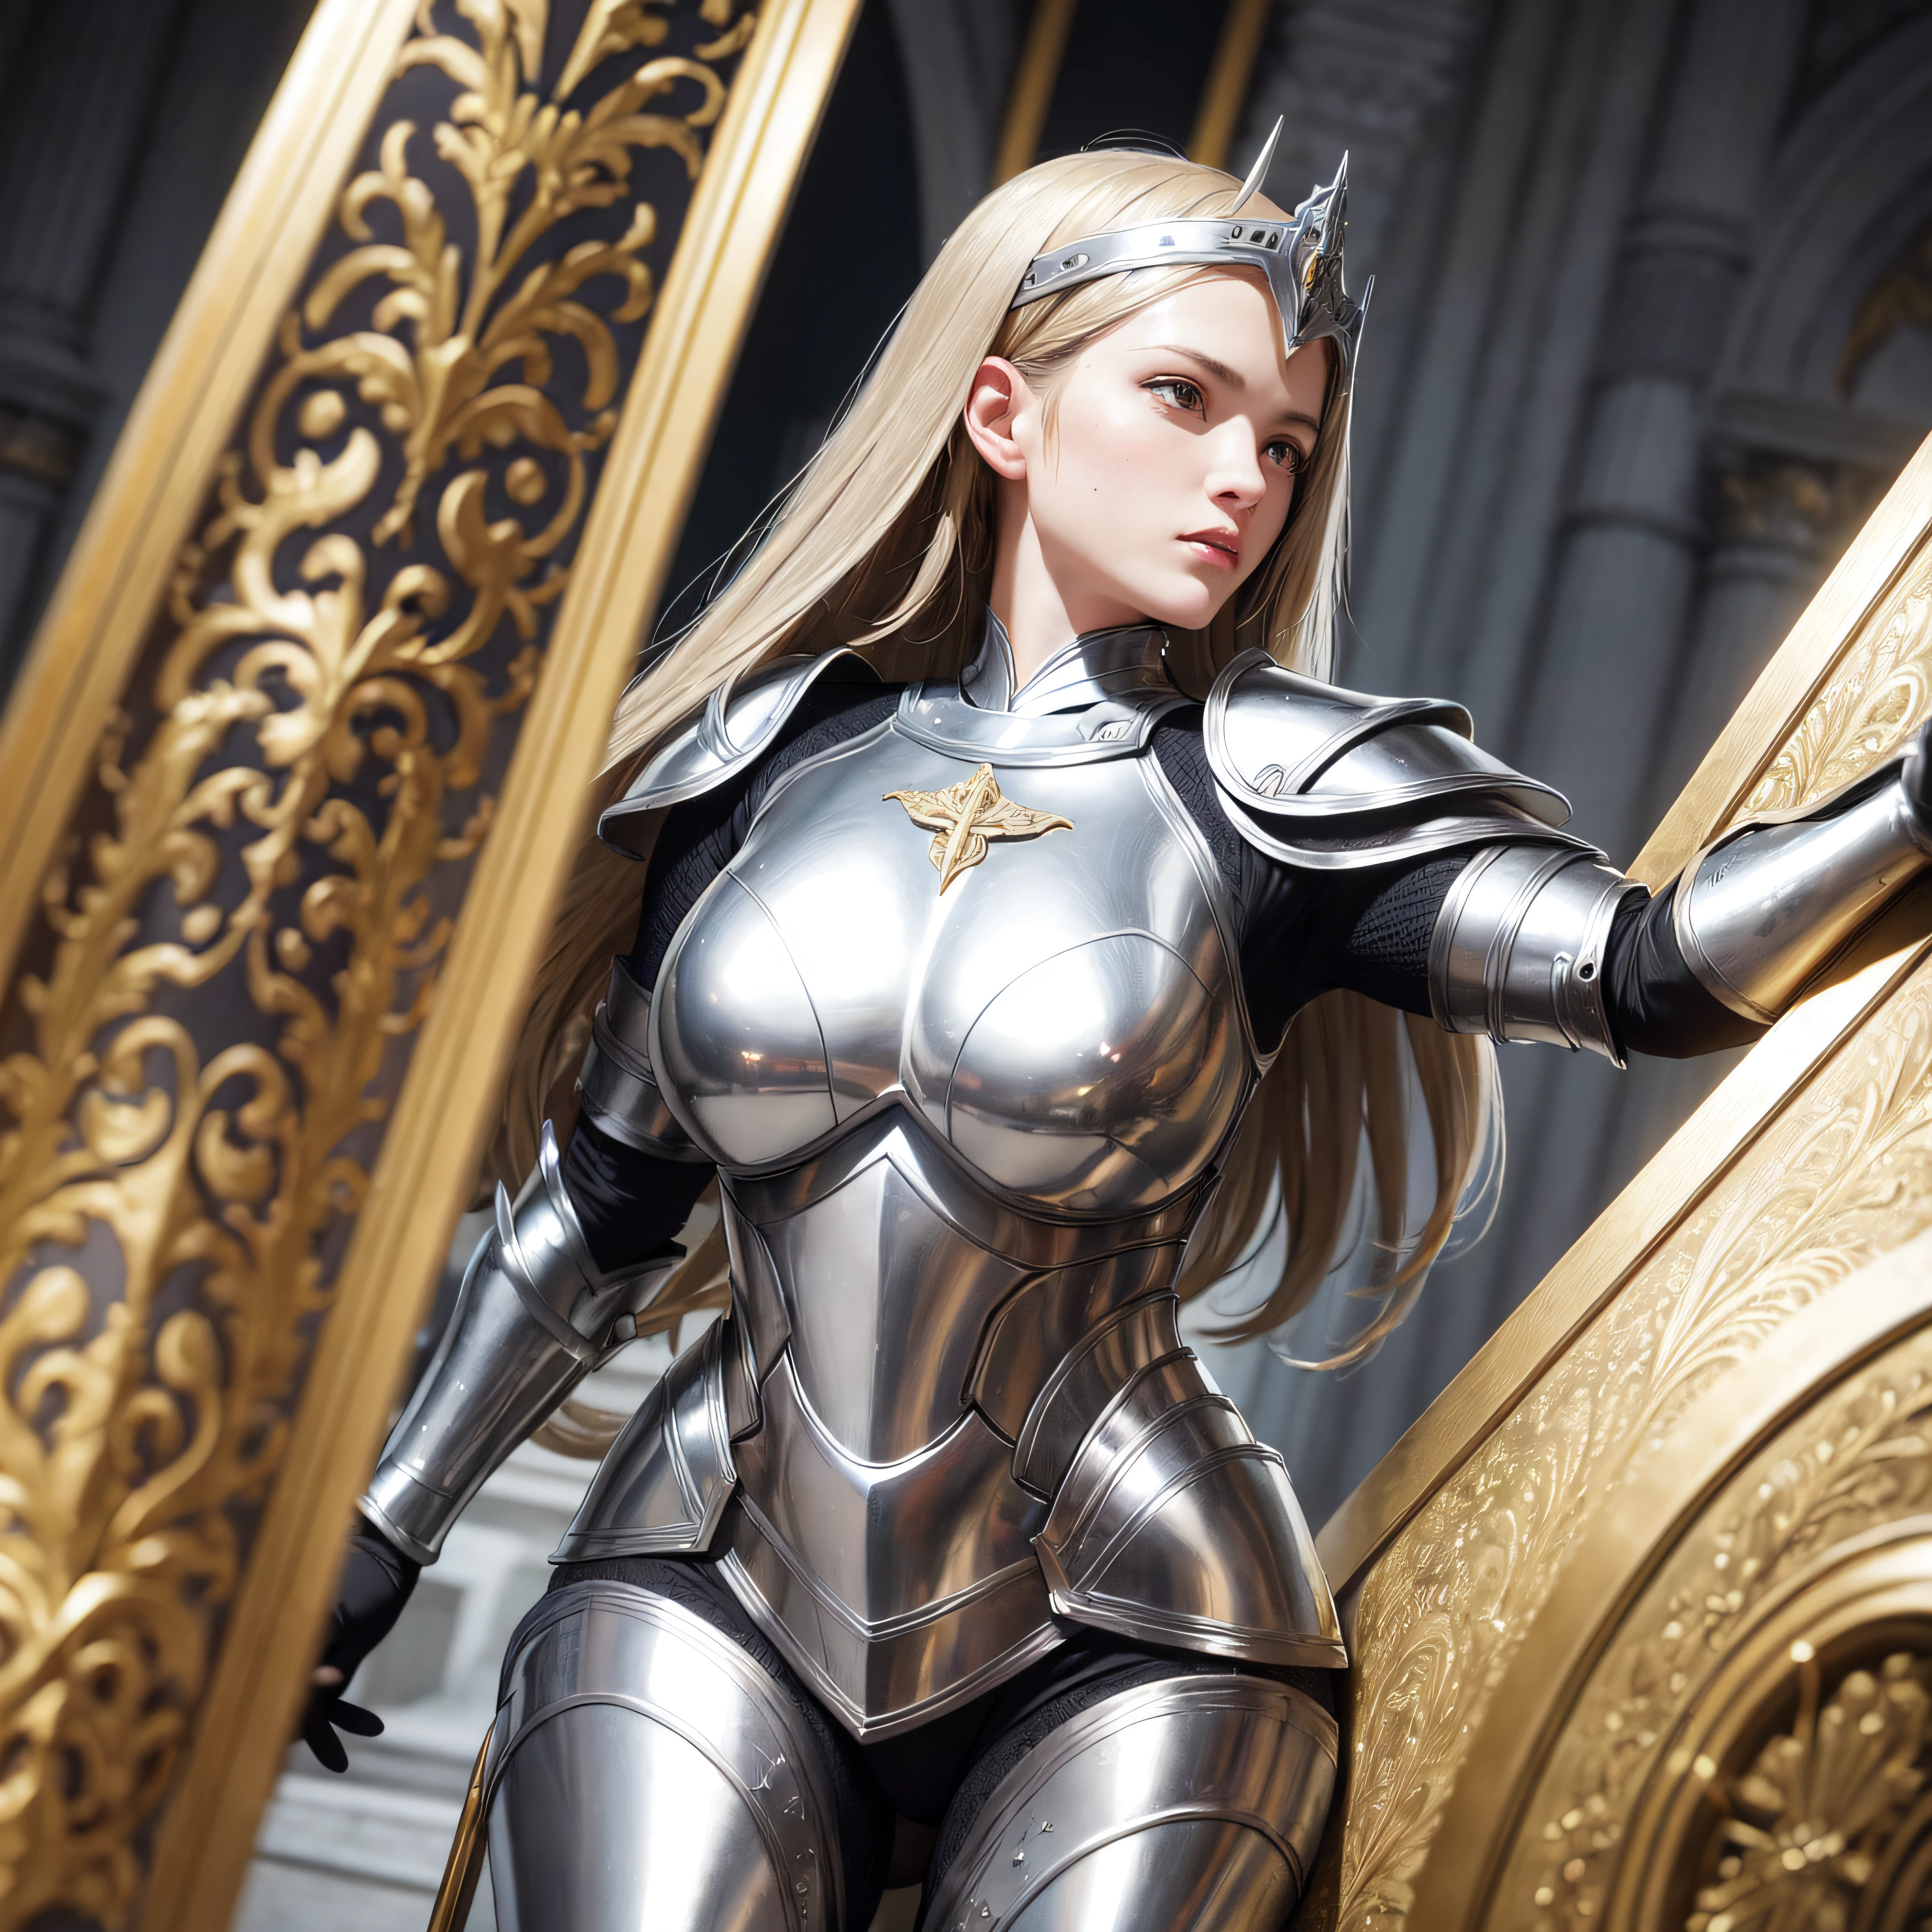 a woman wearing the armor of god, in the style of silver and gold, Christian iconography, finely detailed, hyper realistic, spectacular backdrops